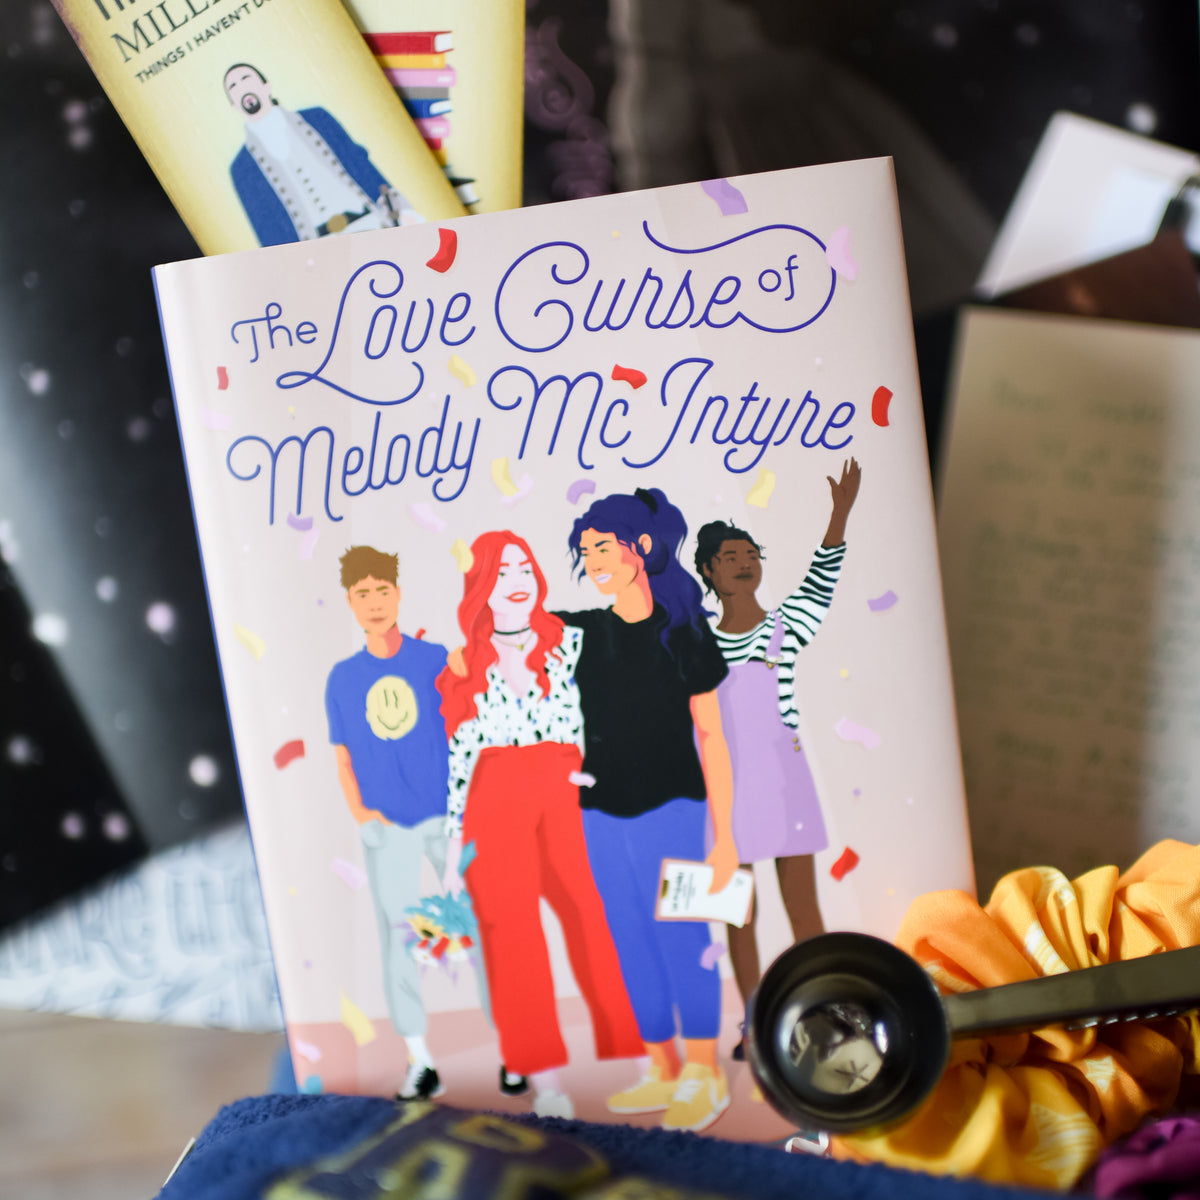 Close-up of The cover of The Love Curse of Melody McIntyre